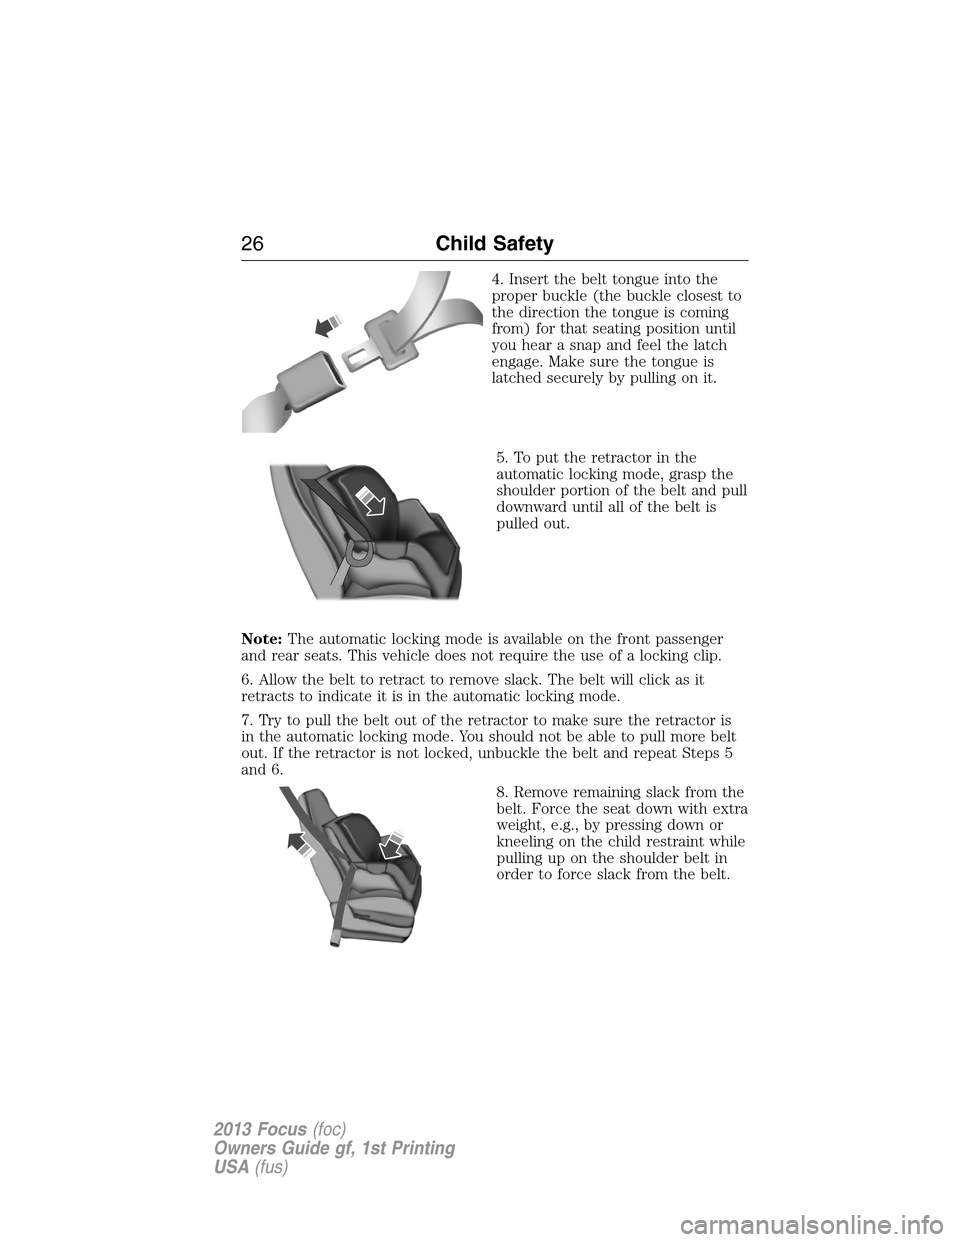 FORD FOCUS 2013 3.G Owners Manual 4. Insert the belt tongue into the
proper buckle (the buckle closest to
the direction the tongue is coming
from) for that seating position until
you hear a snap and feel the latch
engage. Make sure th